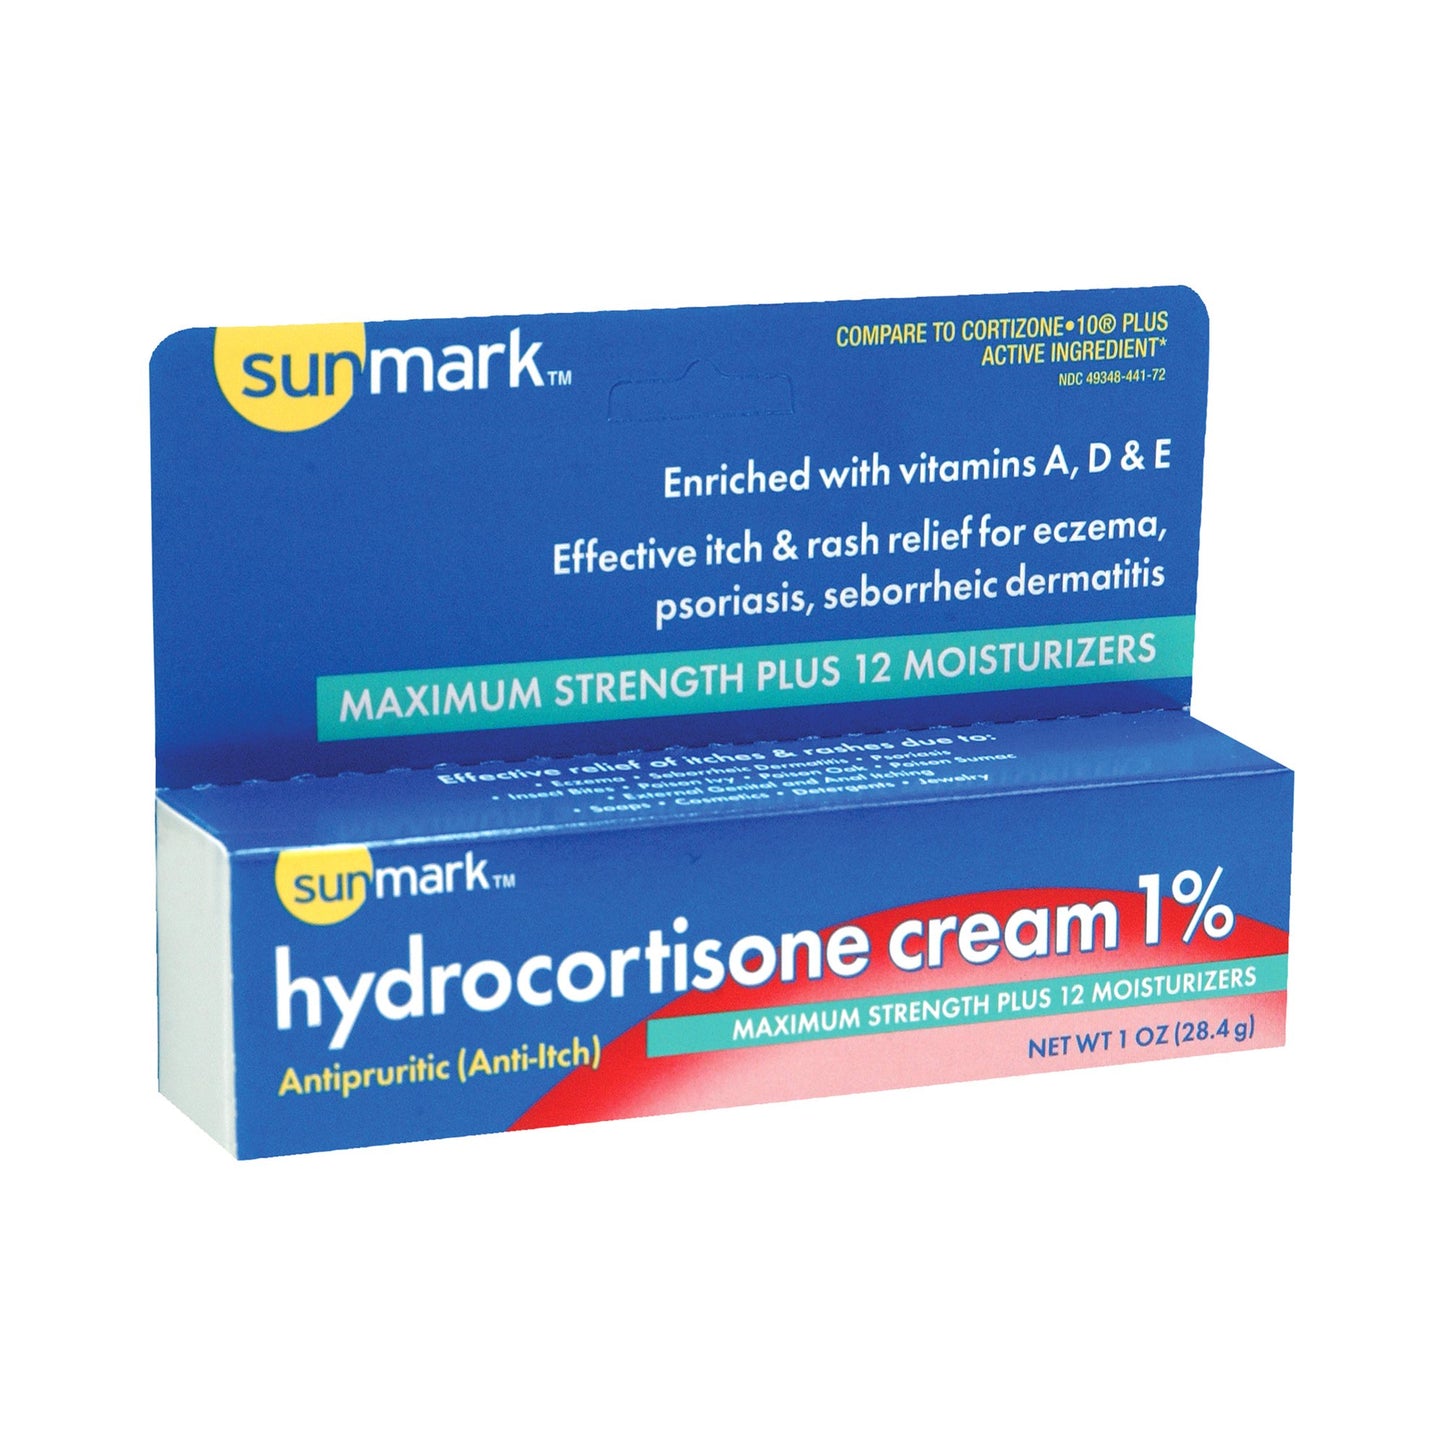 Sunmark® Hydrocortisone Itch Relief, 1-ounce Tube